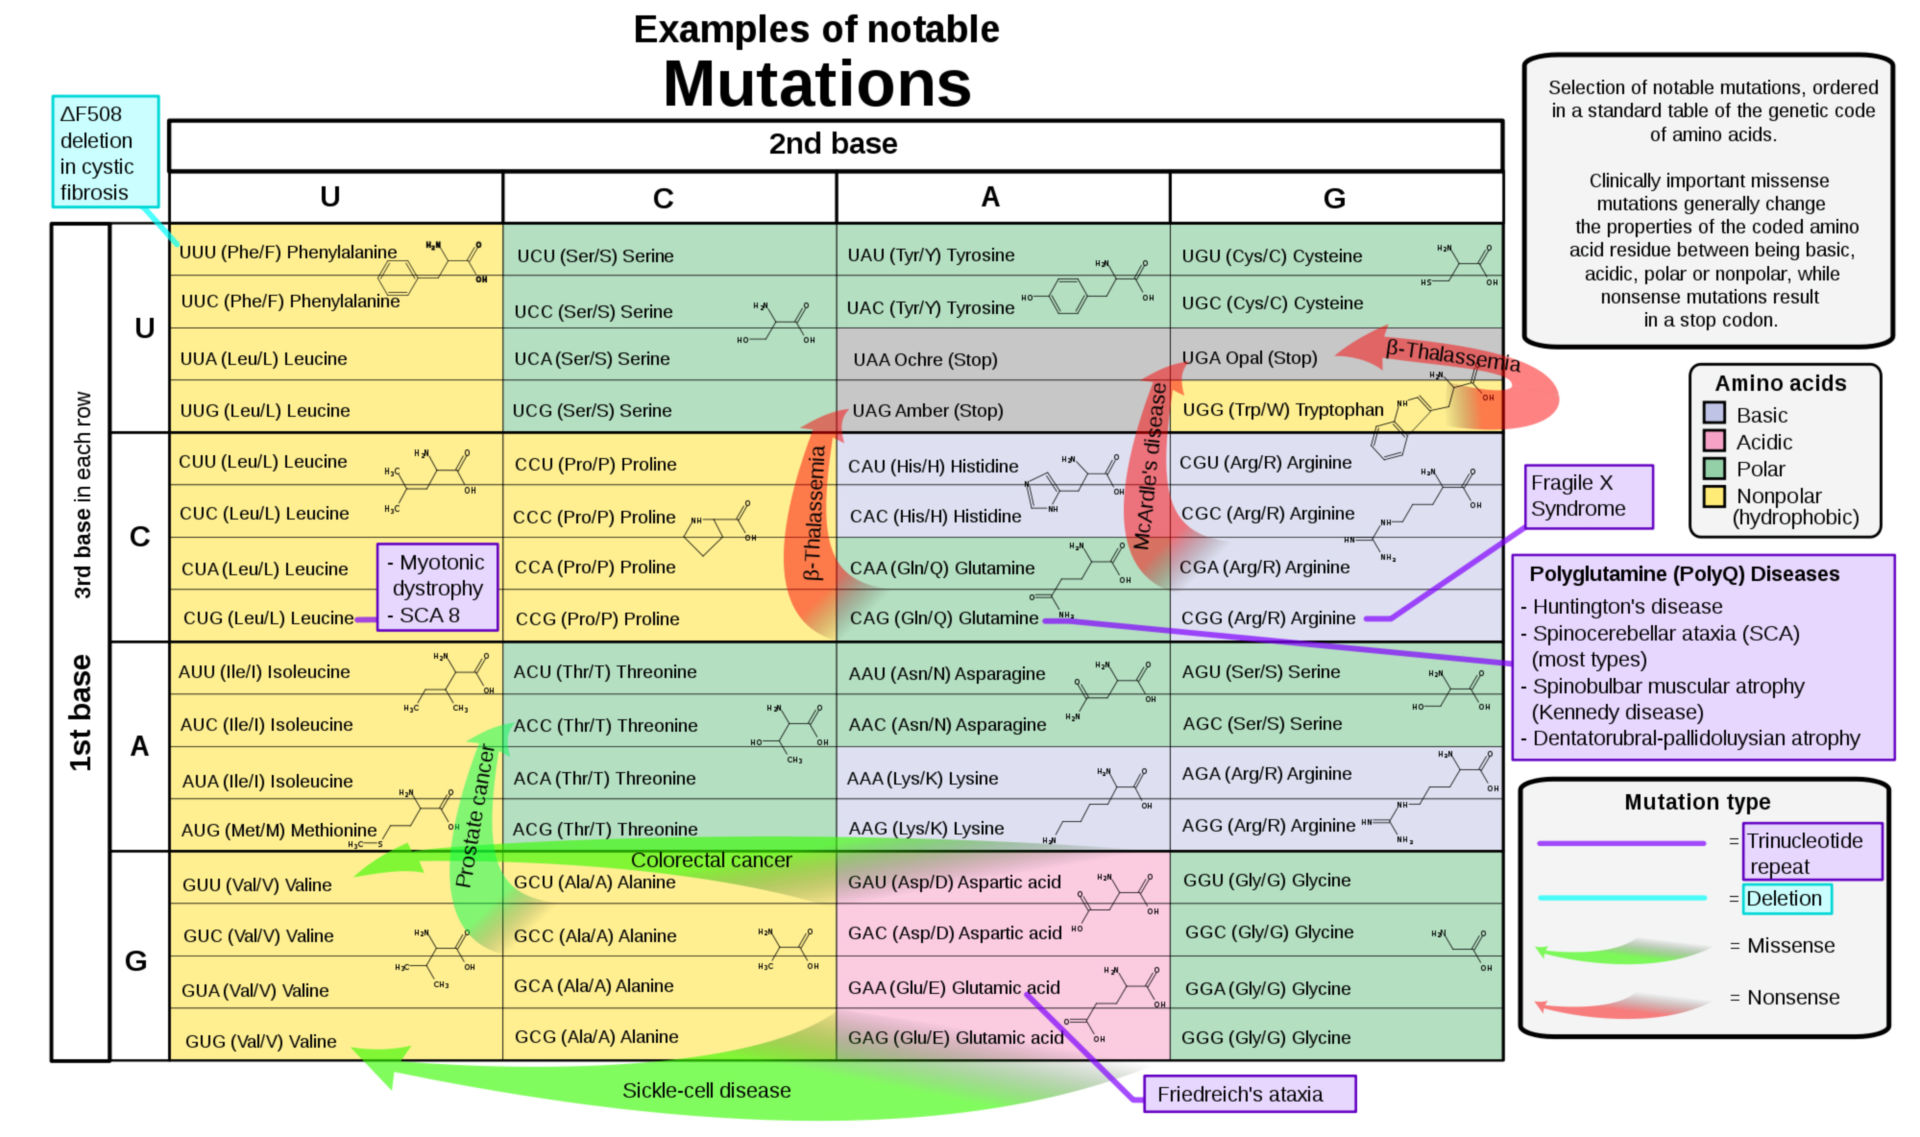 Selection of disease-causing mutations, in a standard table of the genetic code of amino acids